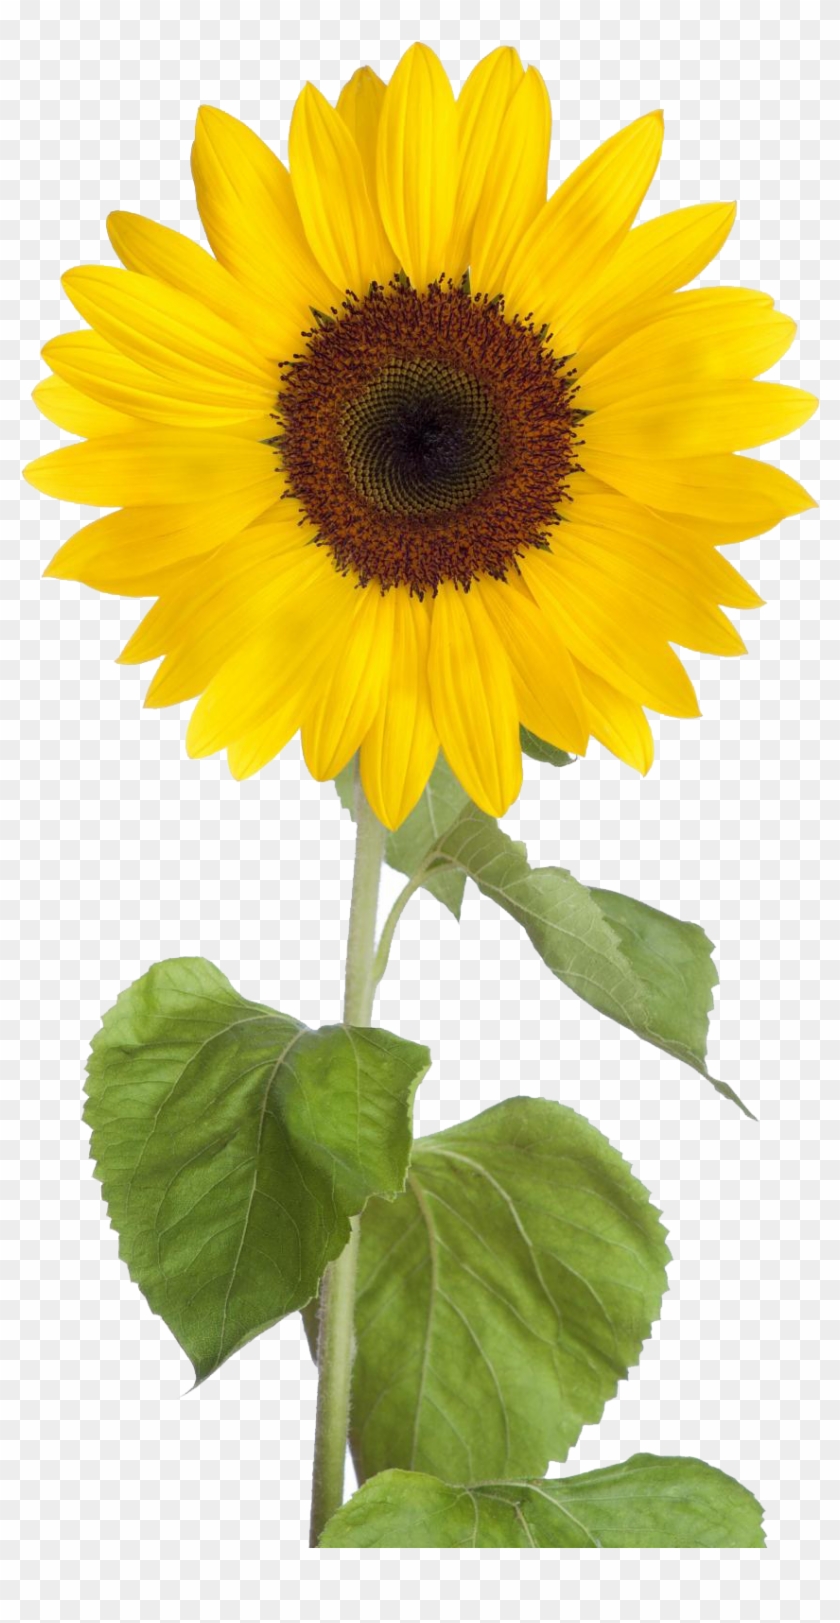 Sunflower png free.